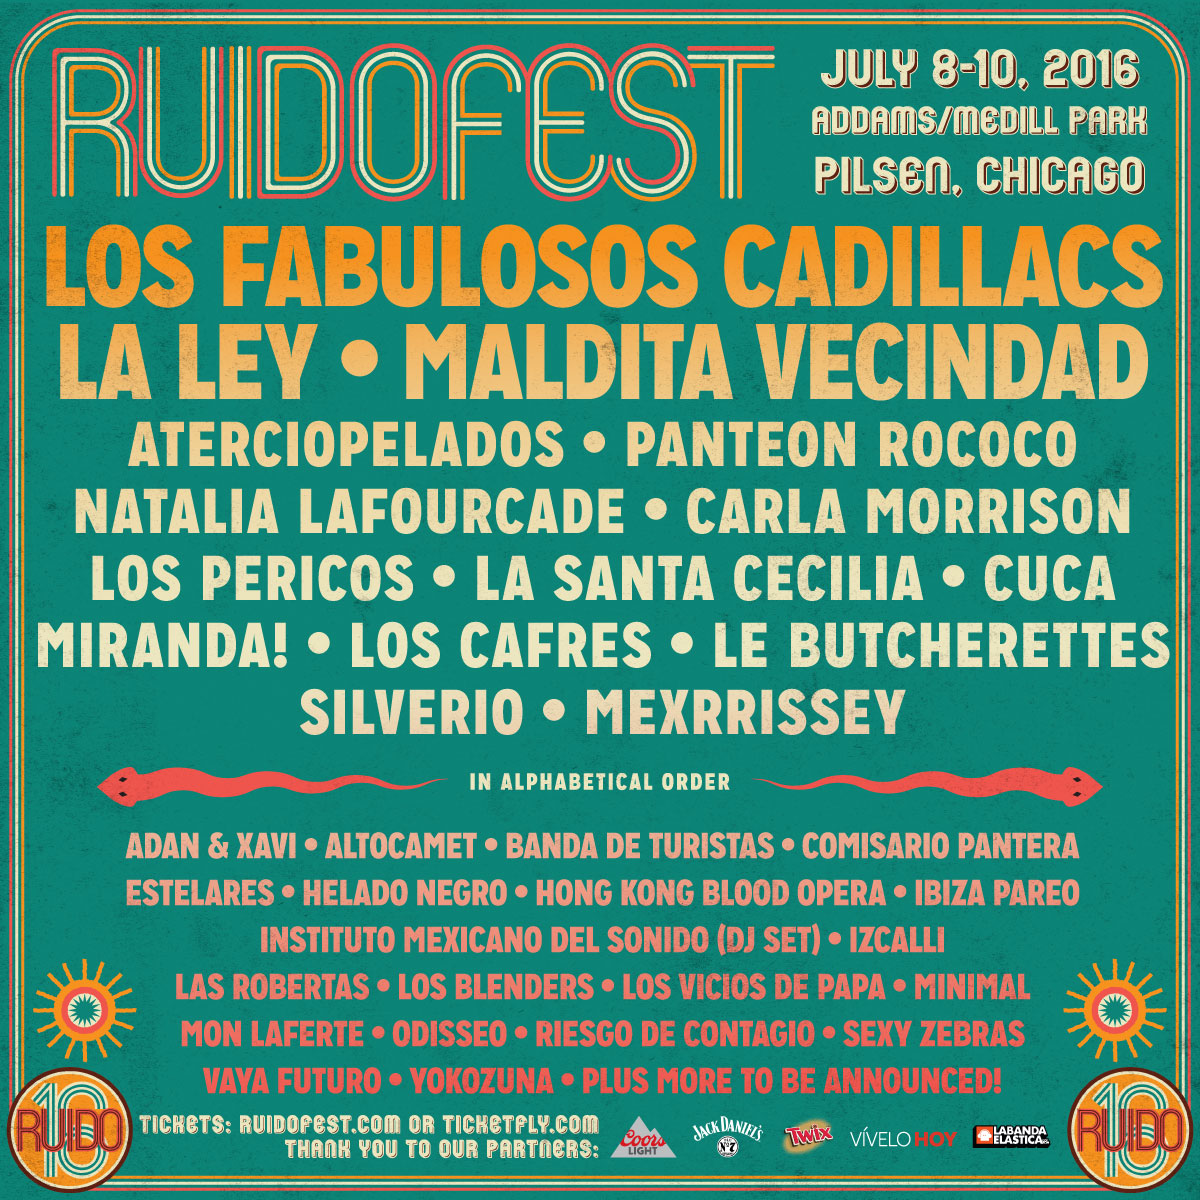 Ruido Fest Tickets Are On-Sale Now